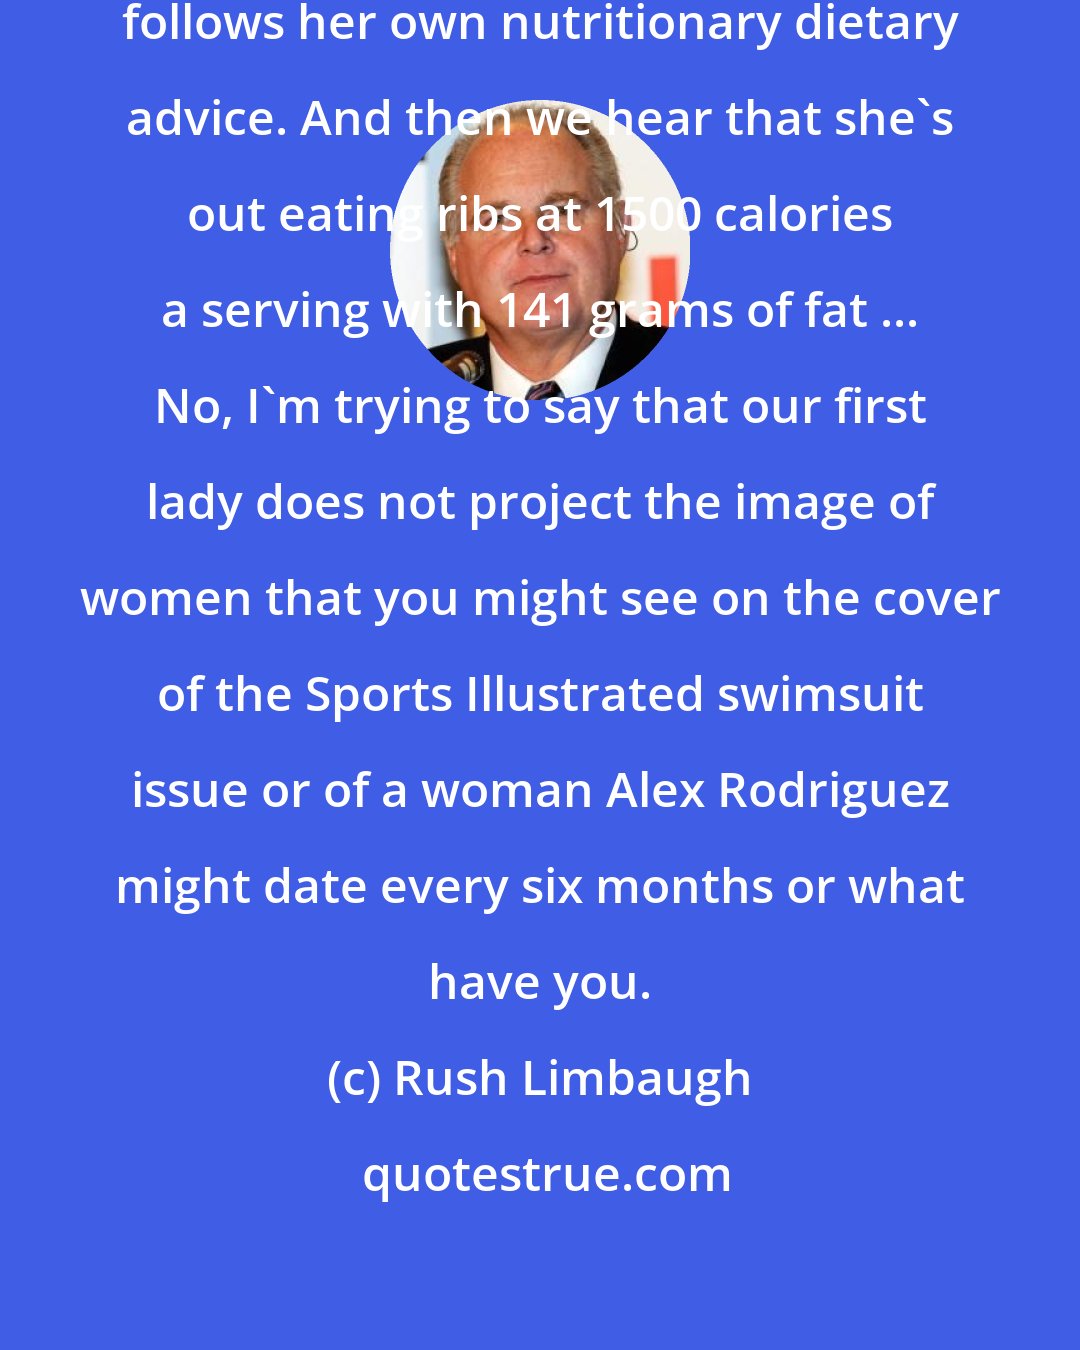 Rush Limbaugh: It doesn't look like Michelle Obama follows her own nutritionary dietary advice. And then we hear that she's out eating ribs at 1500 calories a serving with 141 grams of fat ... No, I'm trying to say that our first lady does not project the image of women that you might see on the cover of the Sports Illustrated swimsuit issue or of a woman Alex Rodriguez might date every six months or what have you.